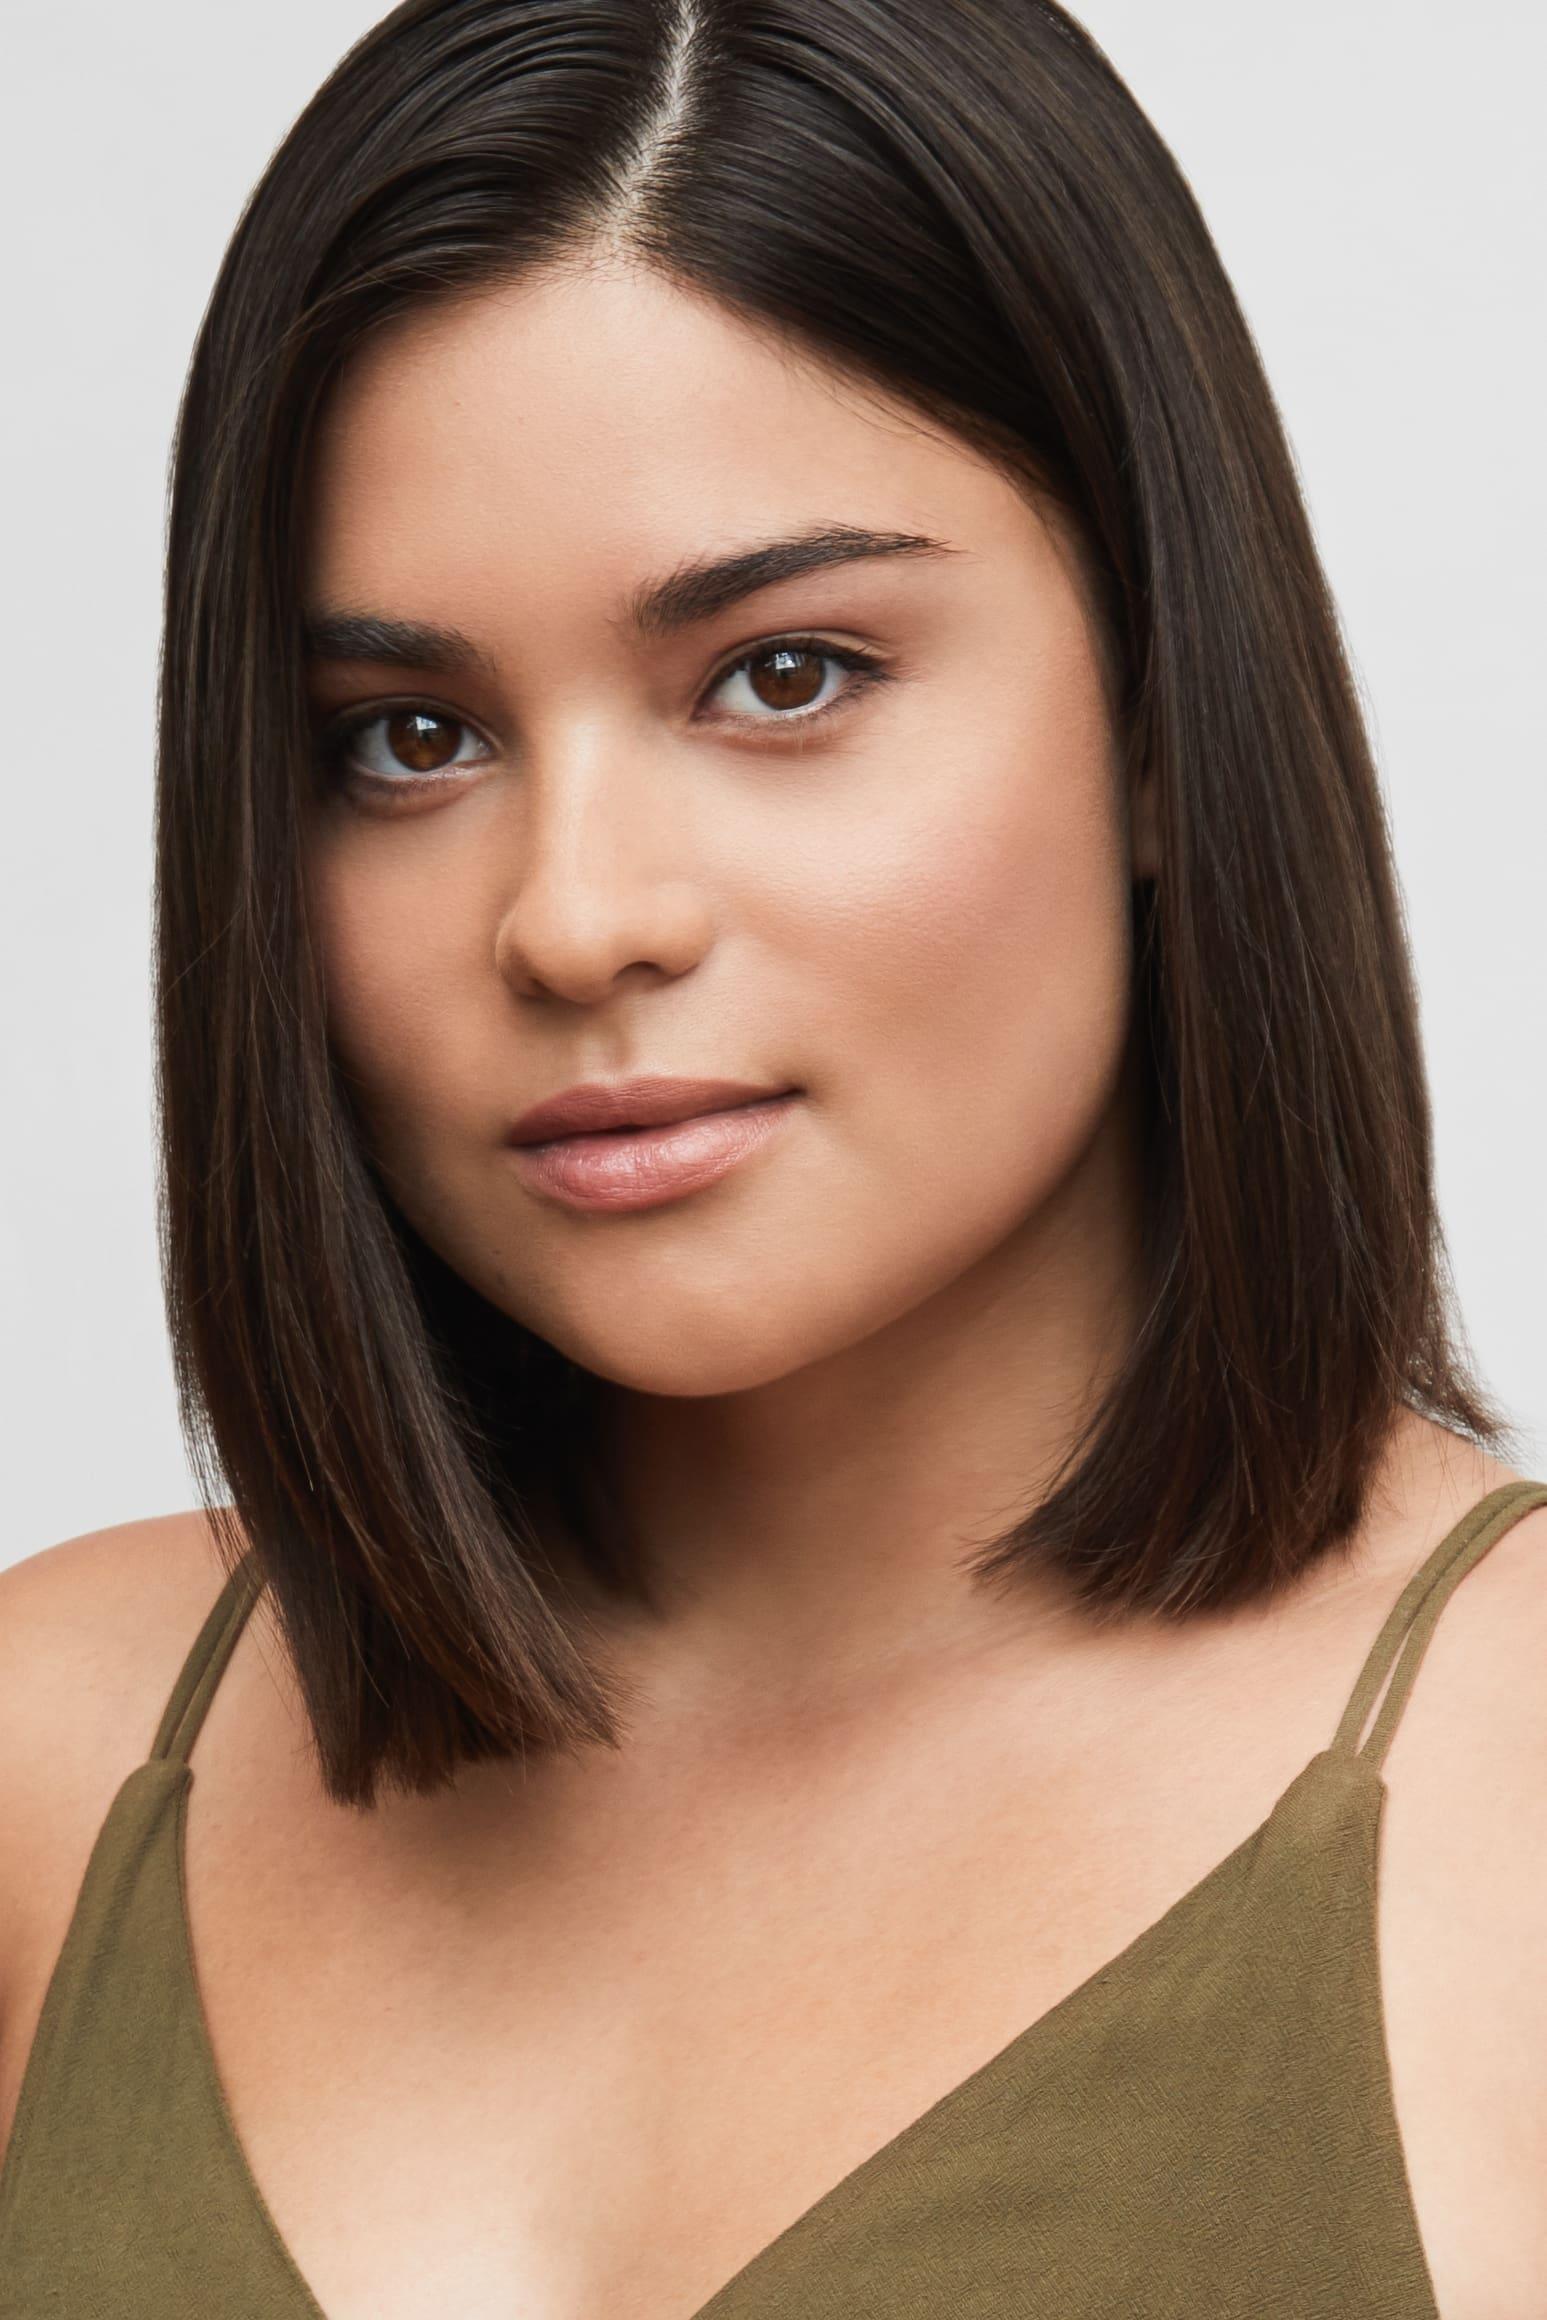 Devery Jacobs poster